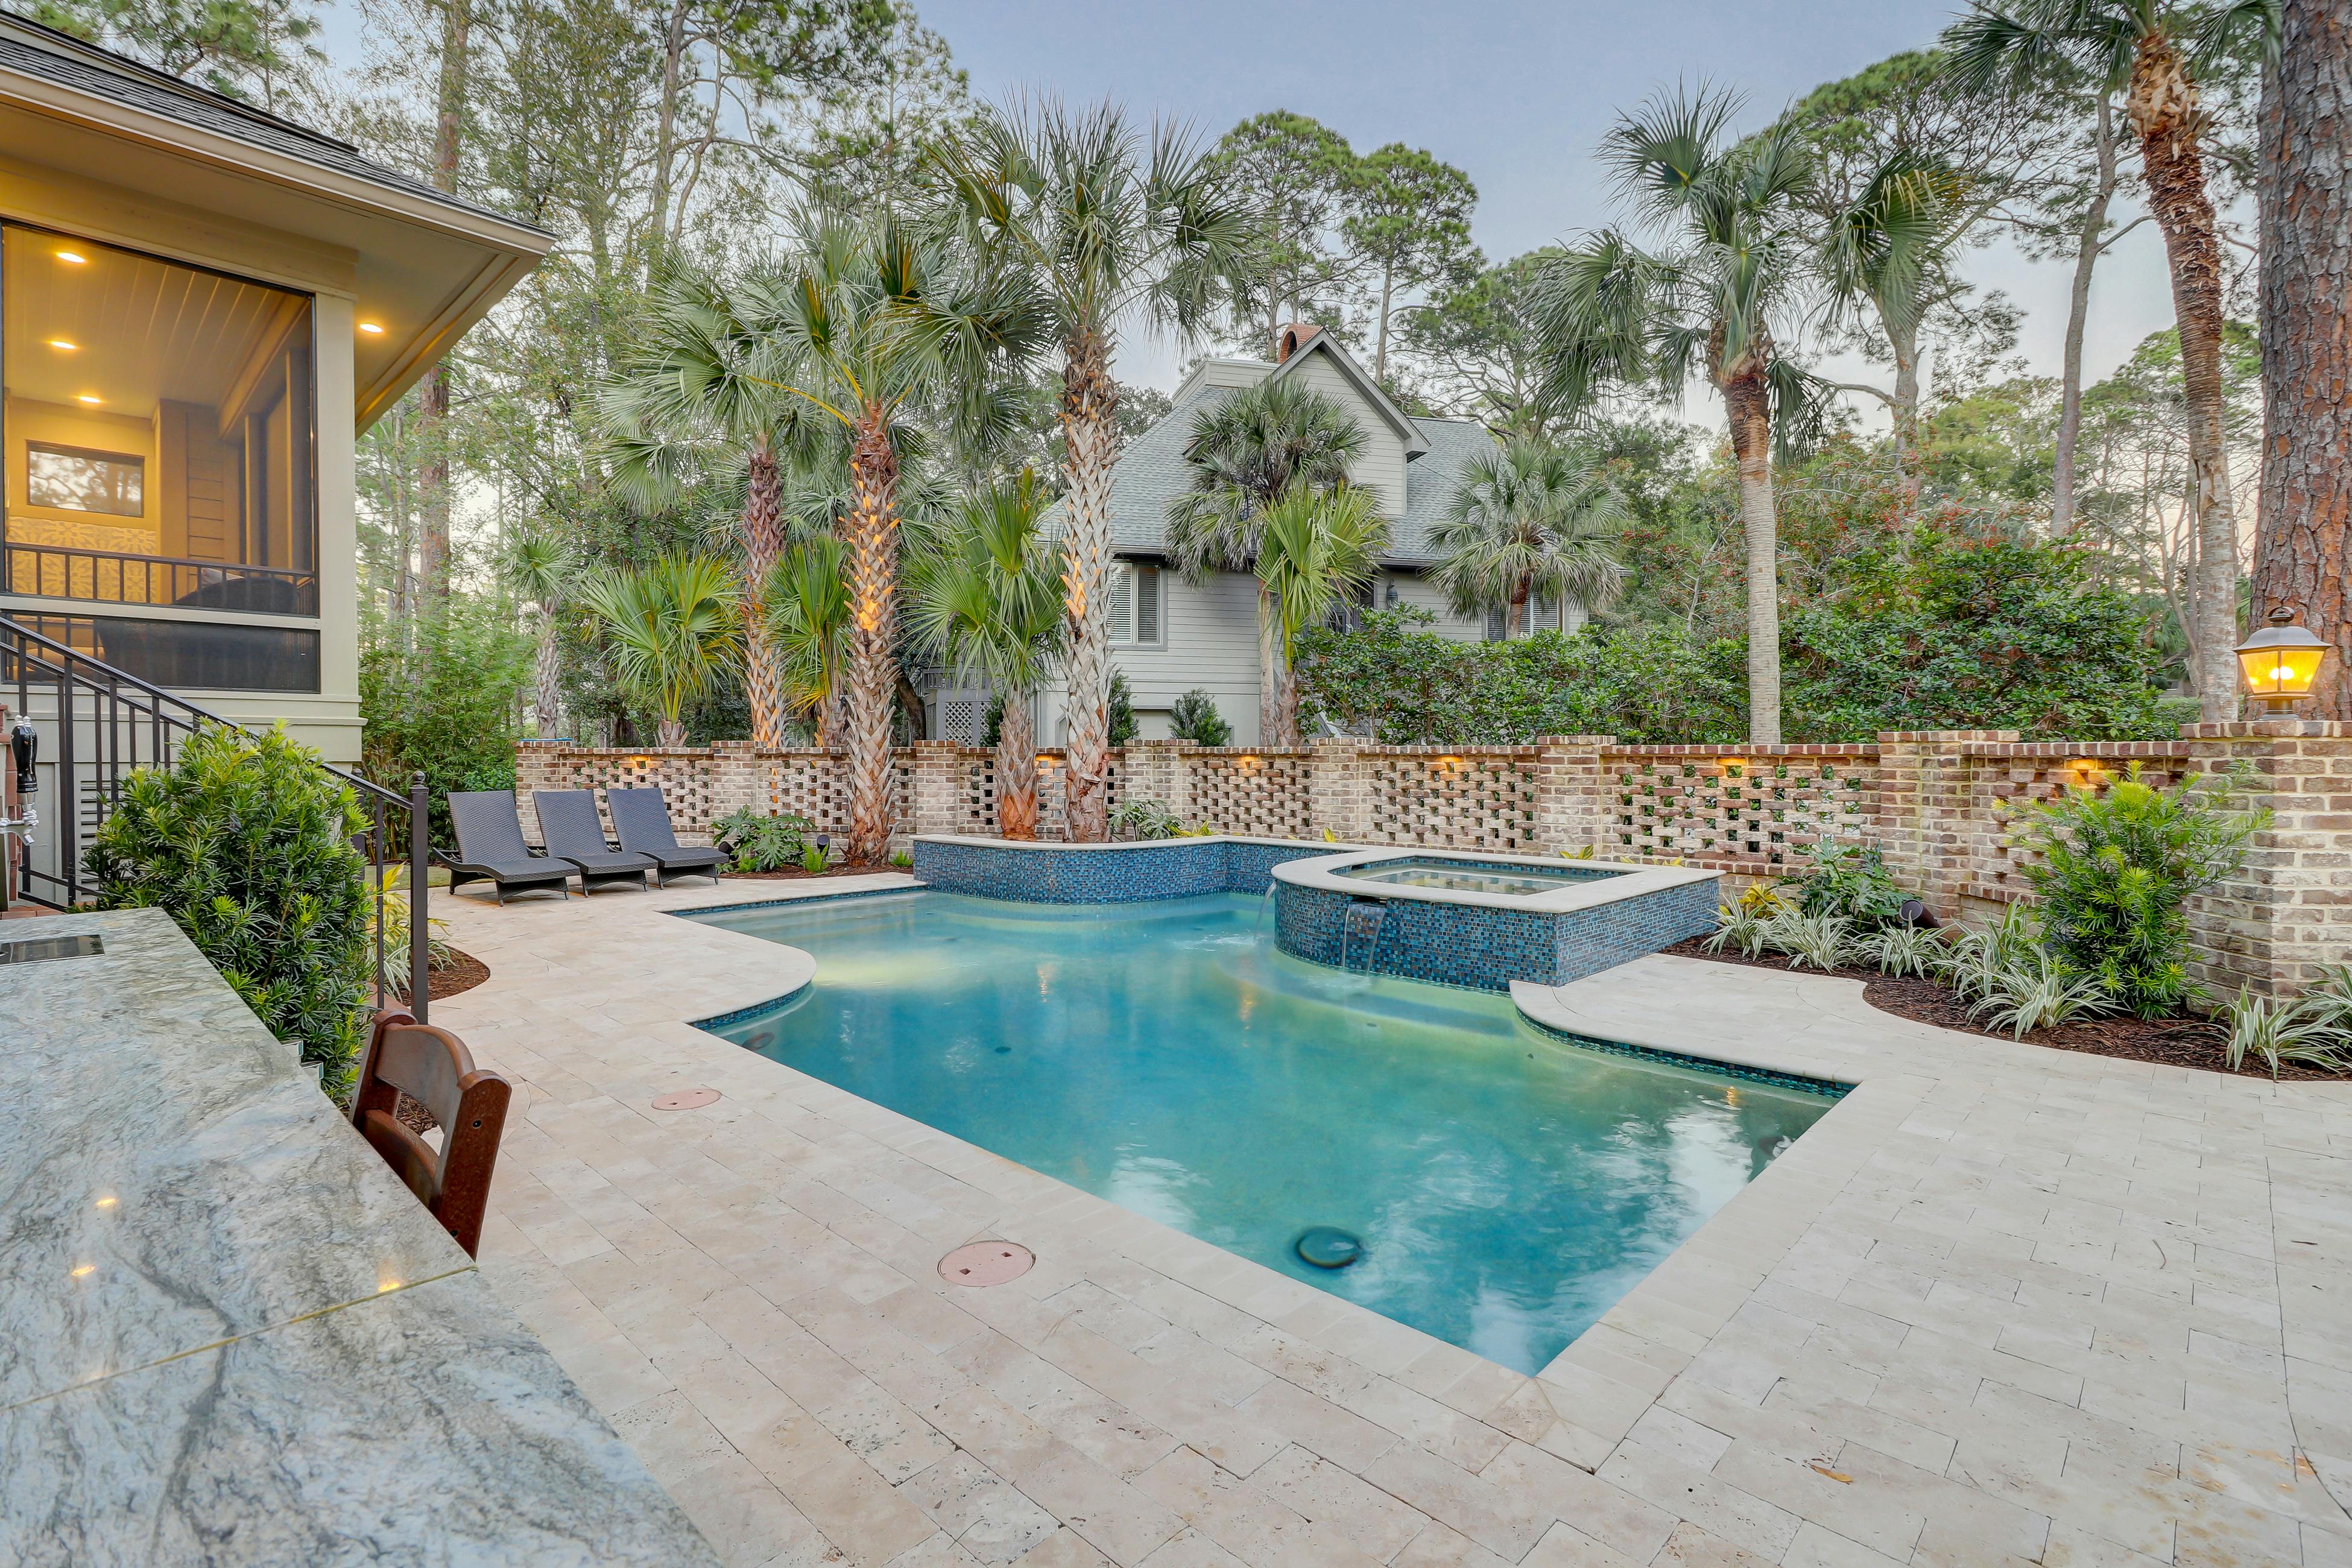 hardscaped backyard with pool surrounded by palm trees in hilton head, sc